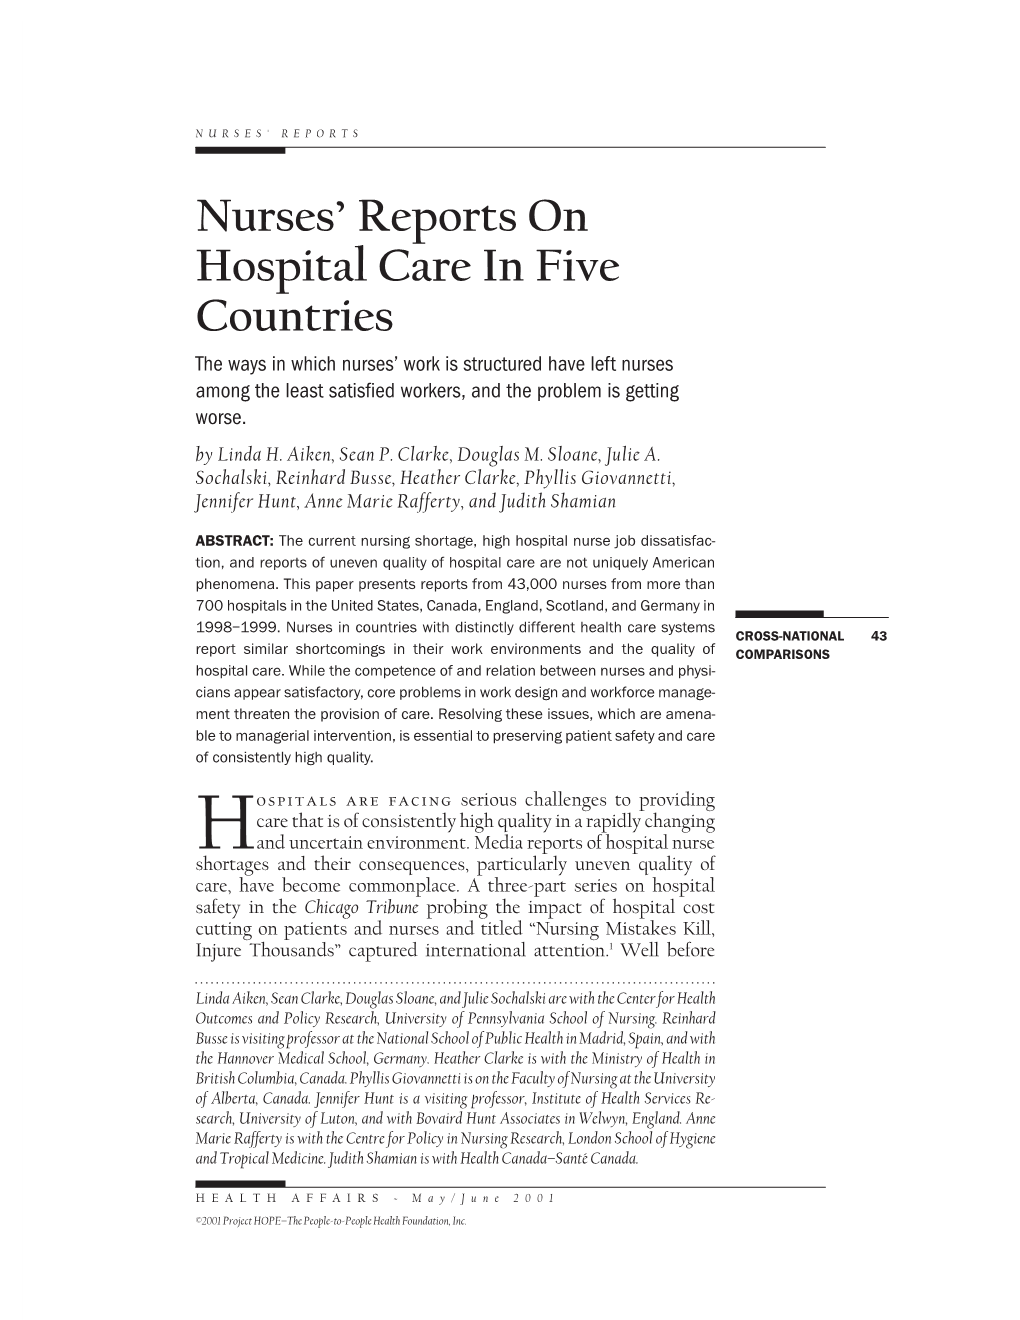 Nurses' Reports on Hospital Care in Five Countries